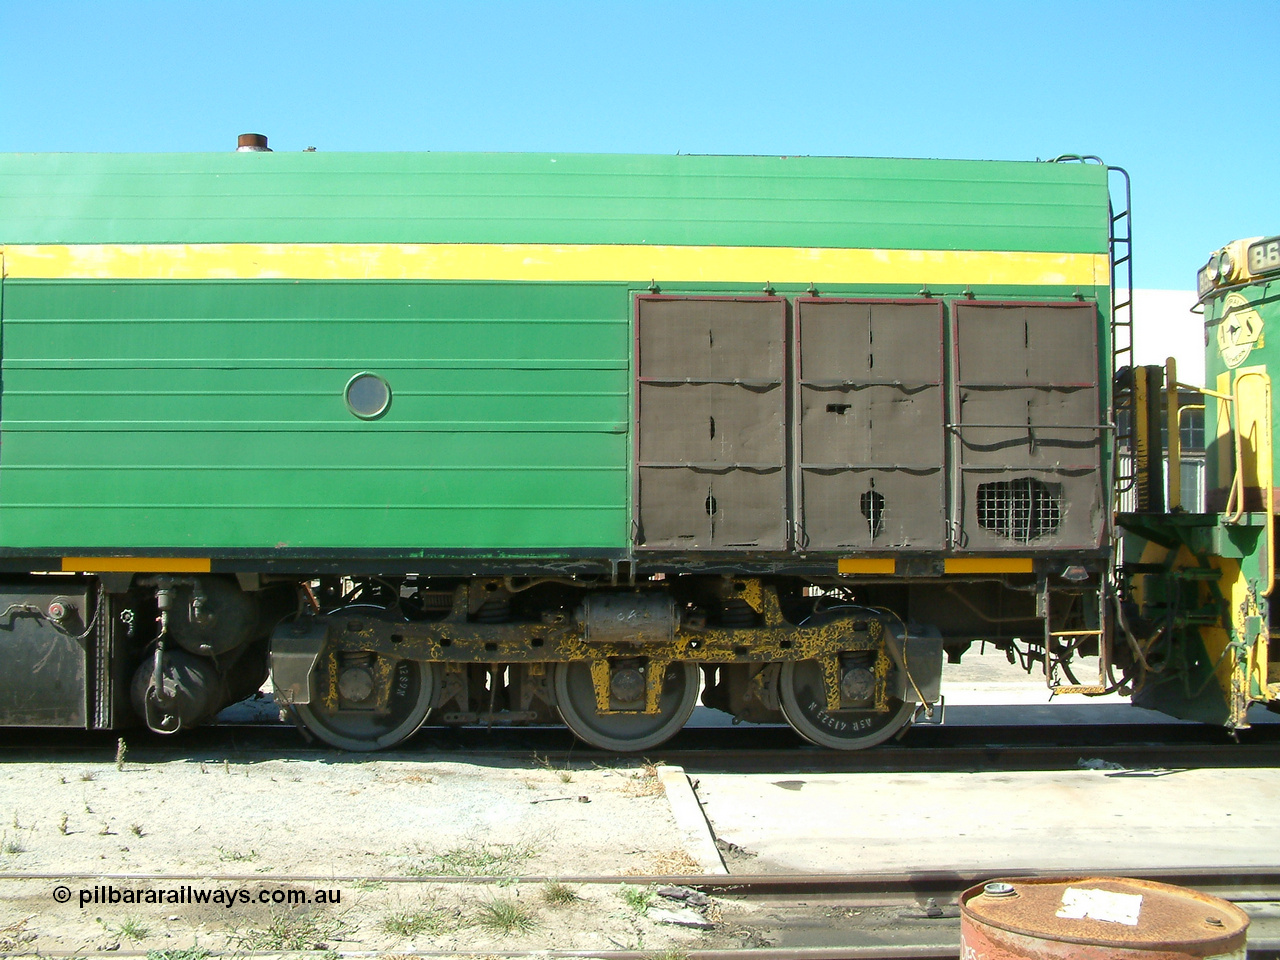 030406 113816
Port Lincoln loco workshops, still wearing the former owner's AN livery, Australian Southern locomotive and NJ class leader NJ 1 'Ben Chifley' Clyde Engineering EMD model JL22C serial 71-728, no. 2 end view. 6th April 2003.
Keywords: NJ-class;NJ1;Clyde-Engineering-Granville-NSW;EMD;JL22C;71-728;